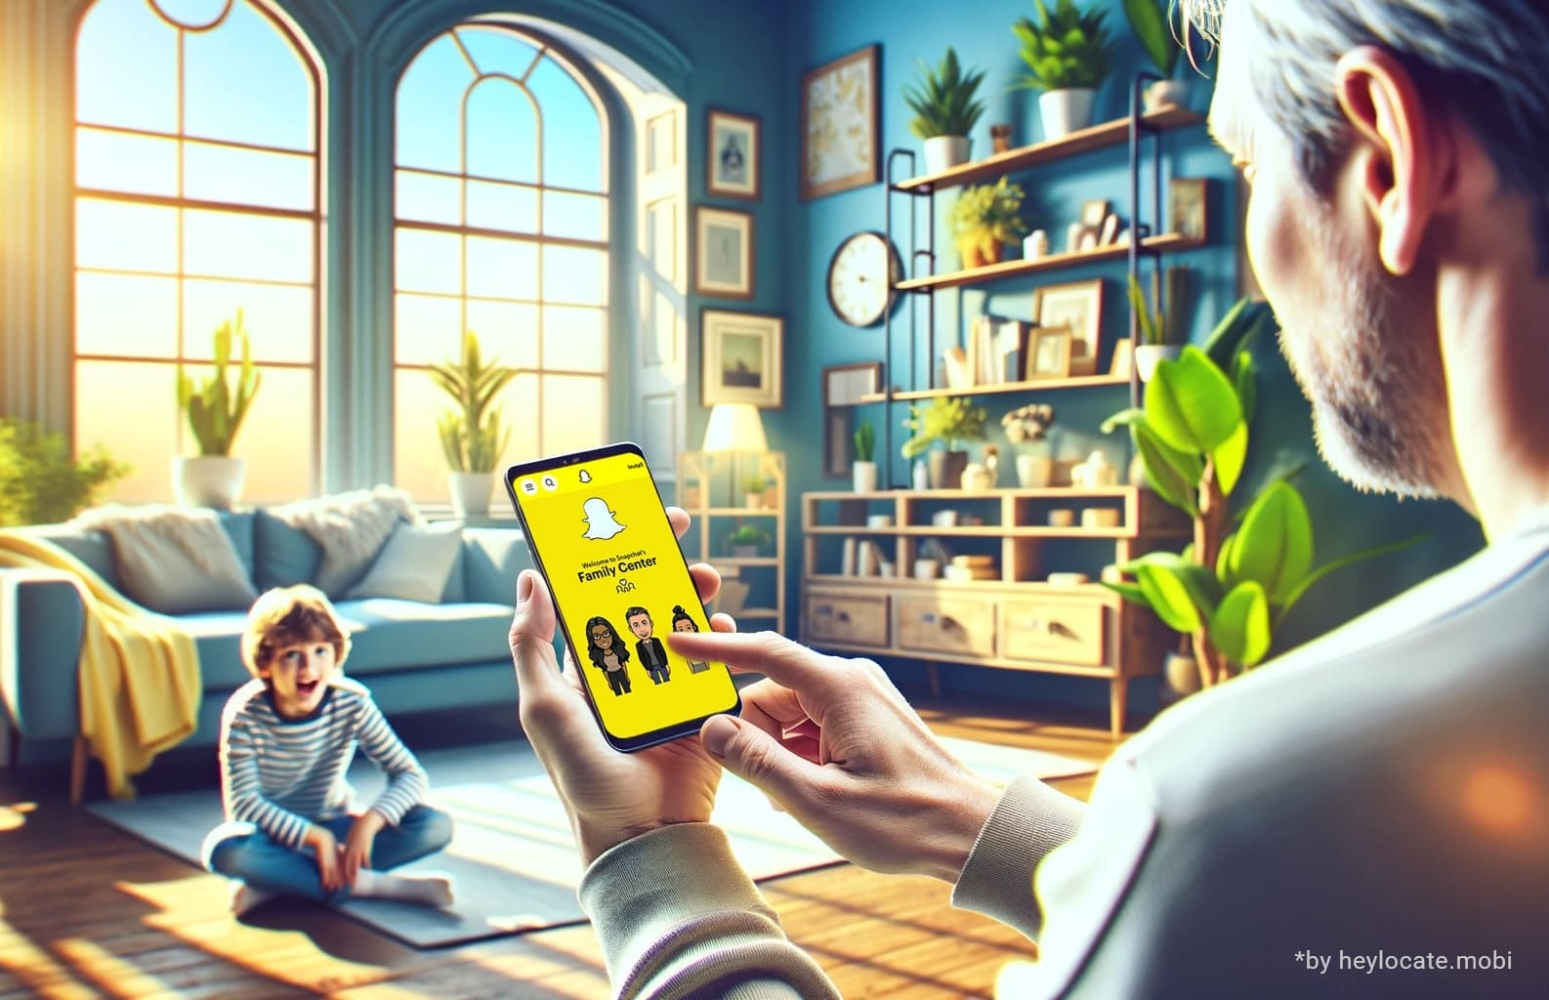 In a spacious bright room, a cheerful child sits on the floor, behind him a sofa and two windows, on the side a shelf with books and a big flower. The child is sitting facing his father, who can be seen from his left shoulder in the image. The father is holding a phone in his hands, on which the information about parental control in Snapchat is open